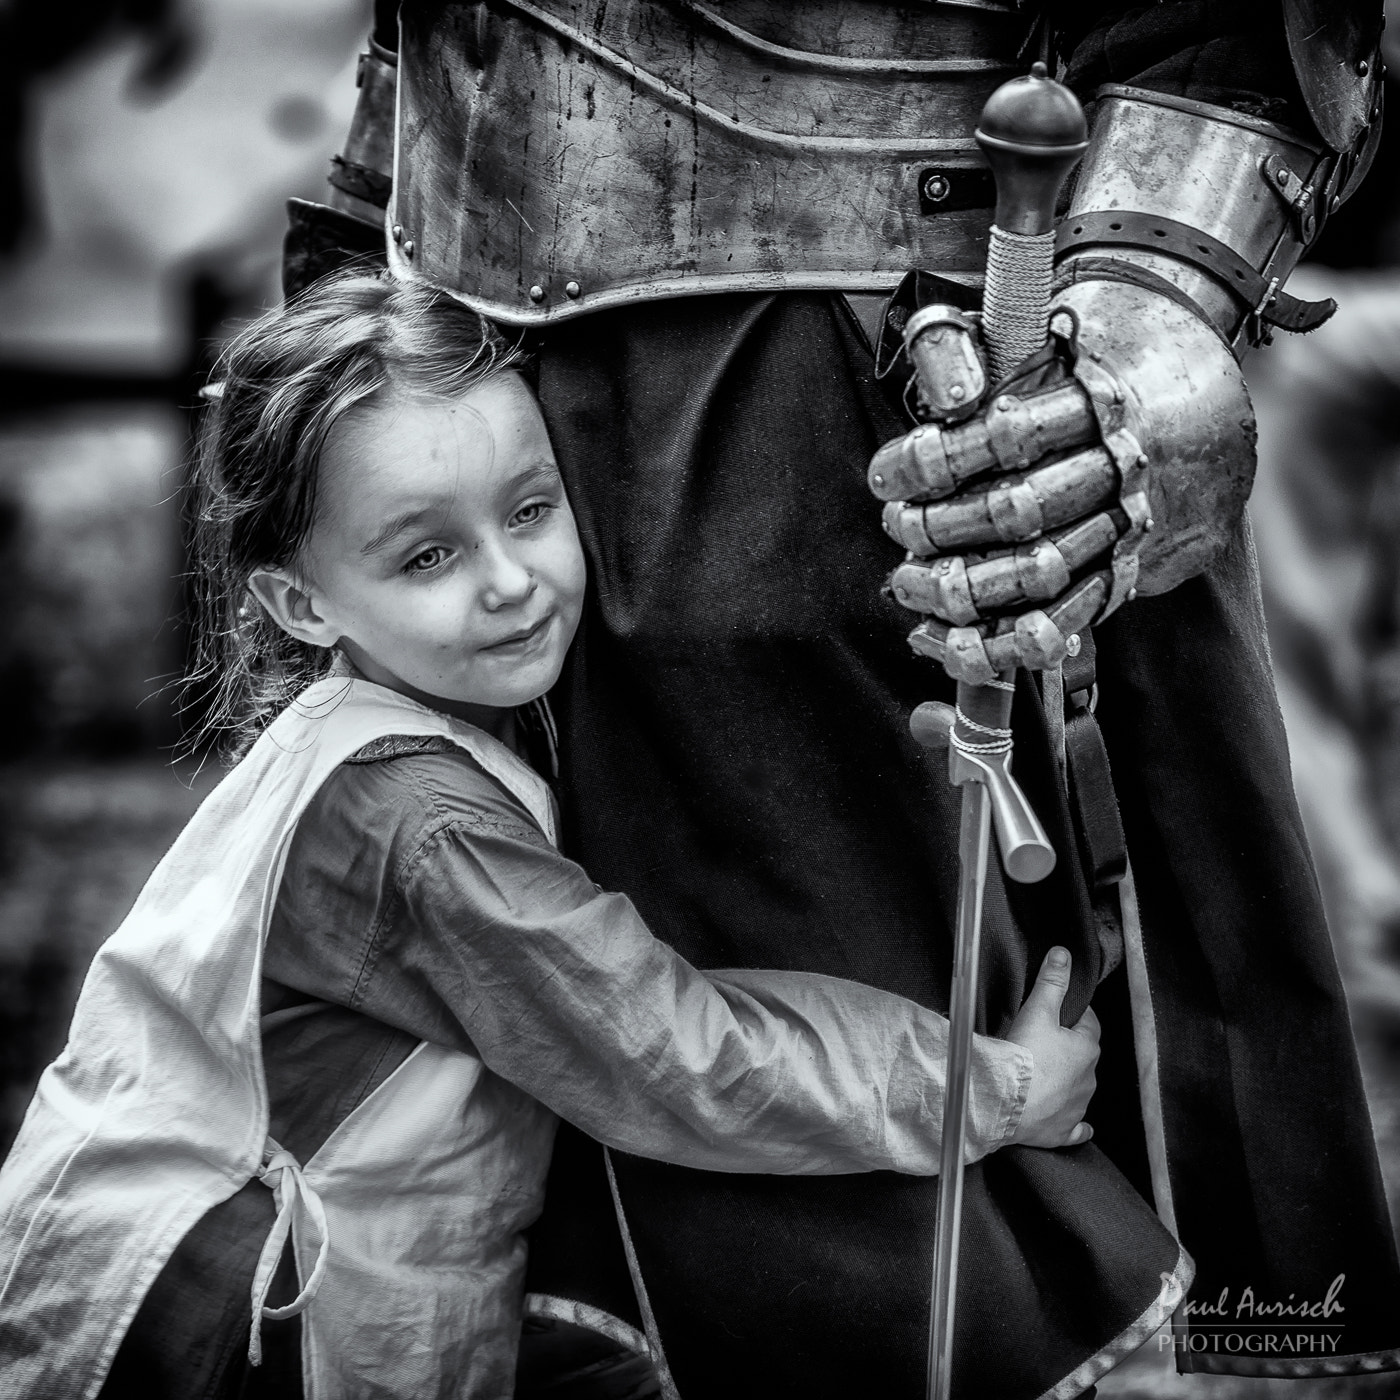 Nikon D7000 sample photo. Little girl and her knight photography